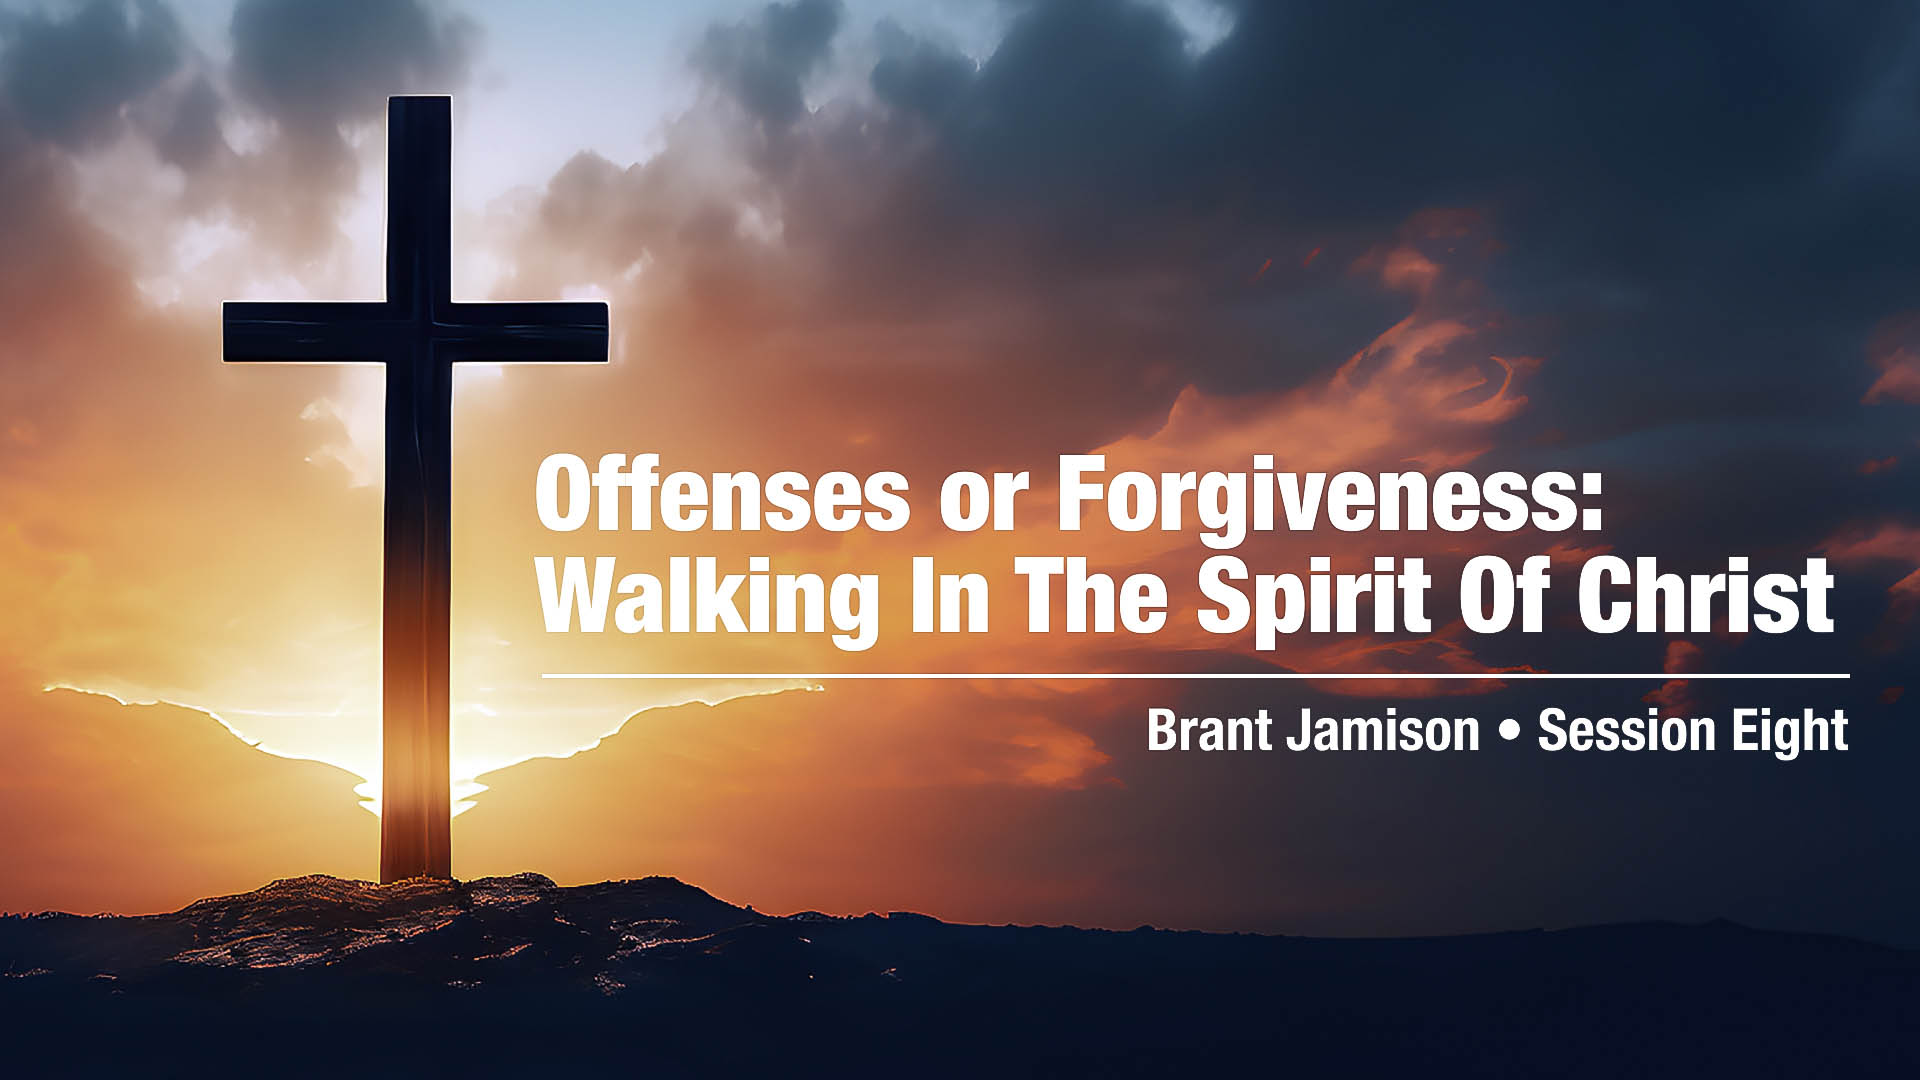 Dunkard Brethren Church| Leadership Conference | Offenses or Forgiveness: Walking In The Spirit Of Christ